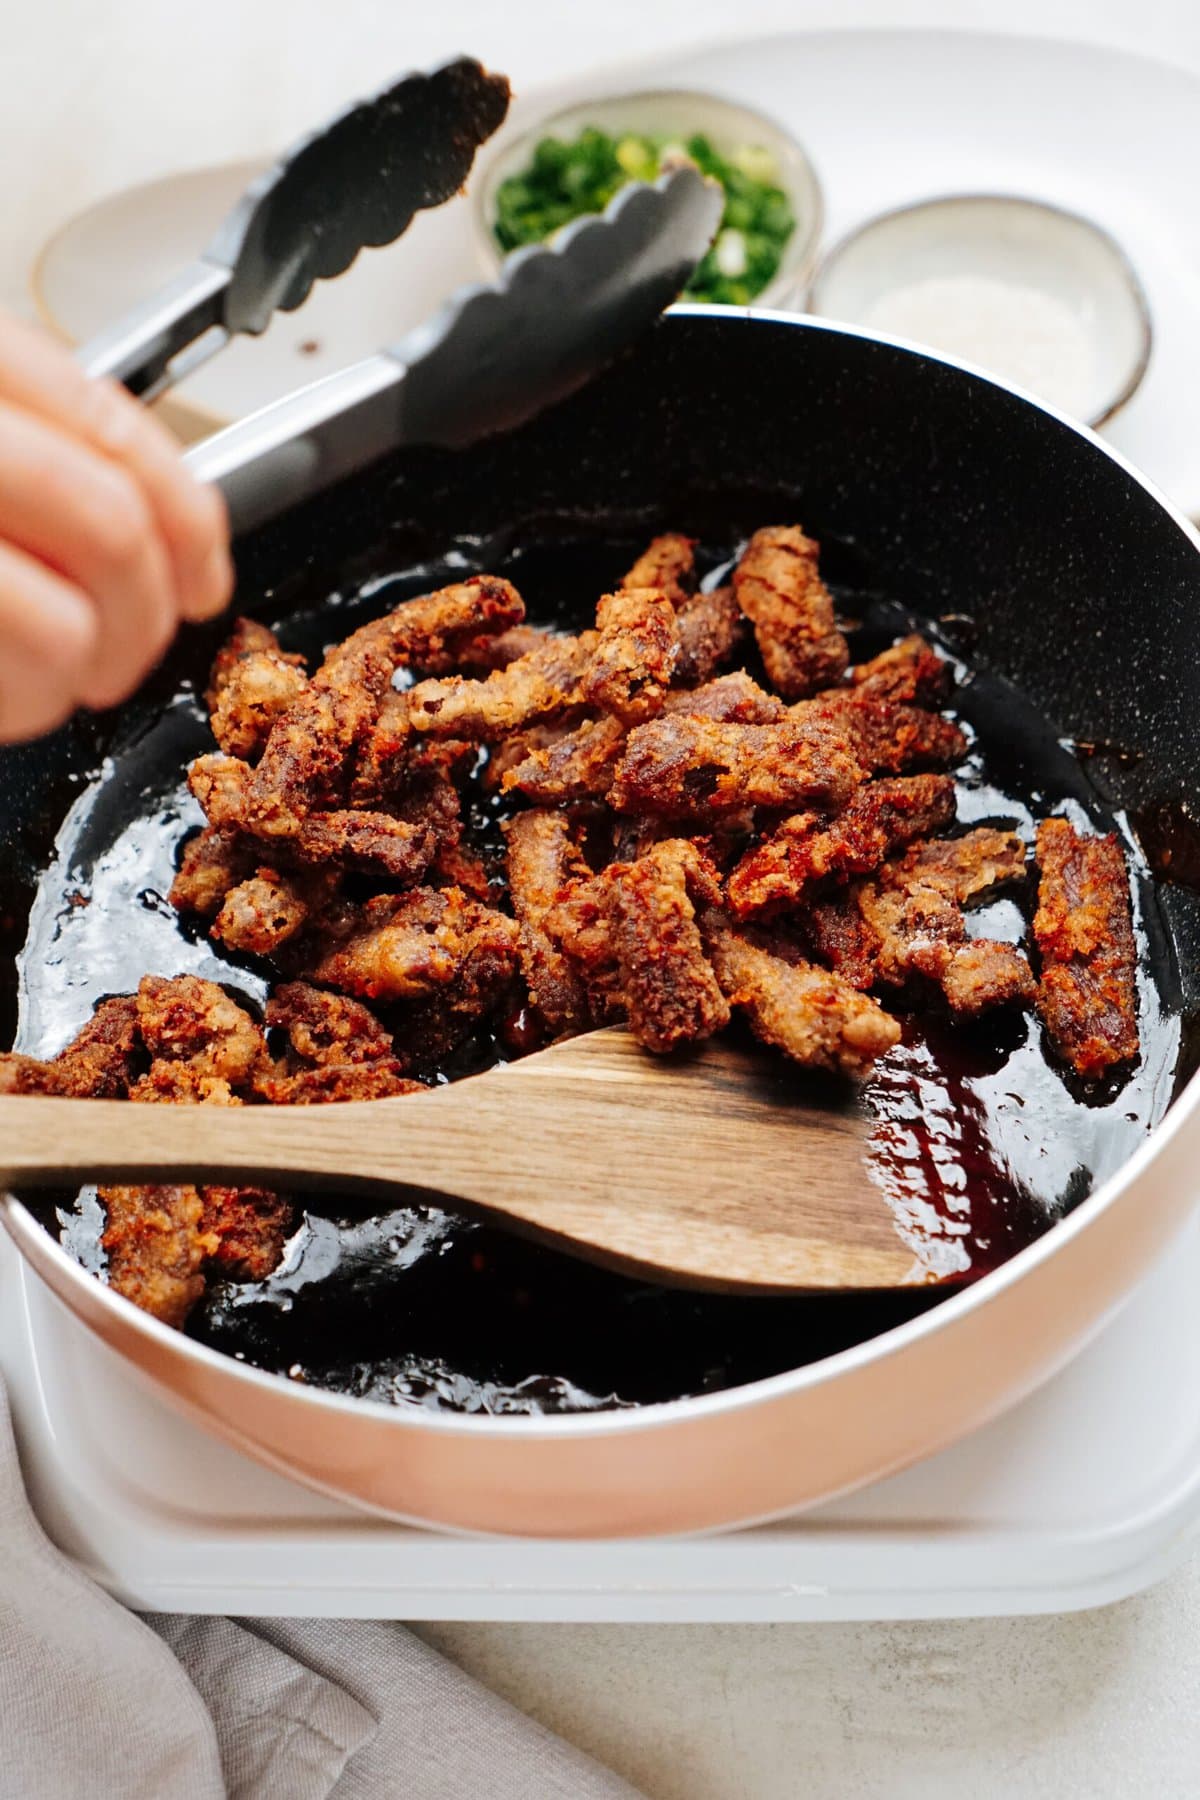 A person uses a wooden spoon to move crispy beef pieces in a black skillet. A wooden spoon rests in the skillet. Bowls of chopped green onions and a white sauce are in the background.